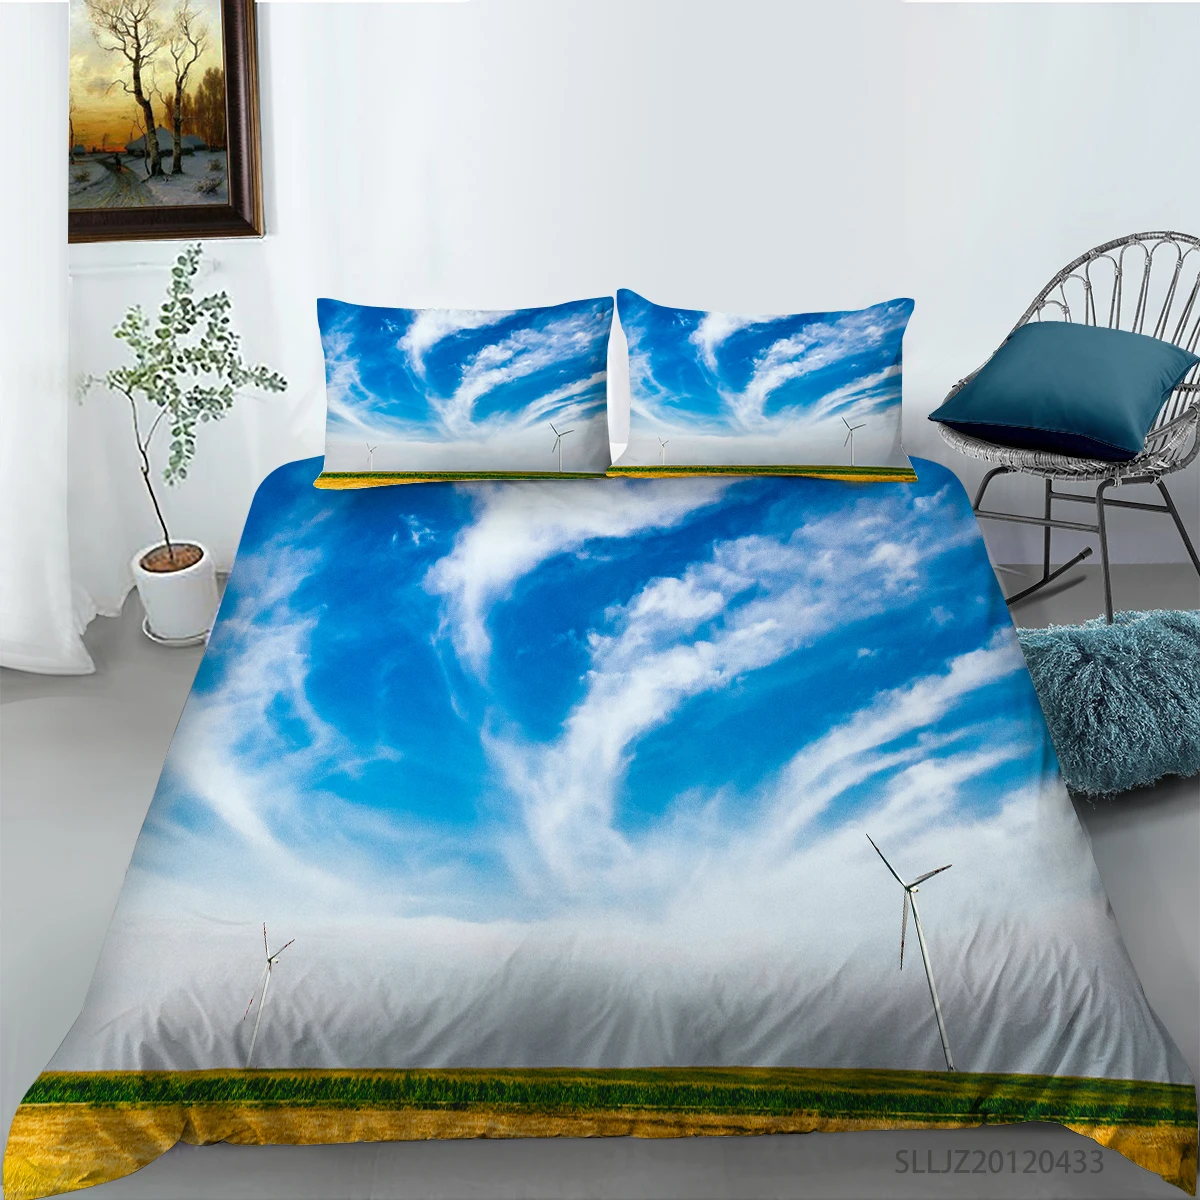 

New Blue Sky and Clouds Printing Bedding set Quilt cover with pillowcases Single Queen King sizes 2/3pcs Home Textiles